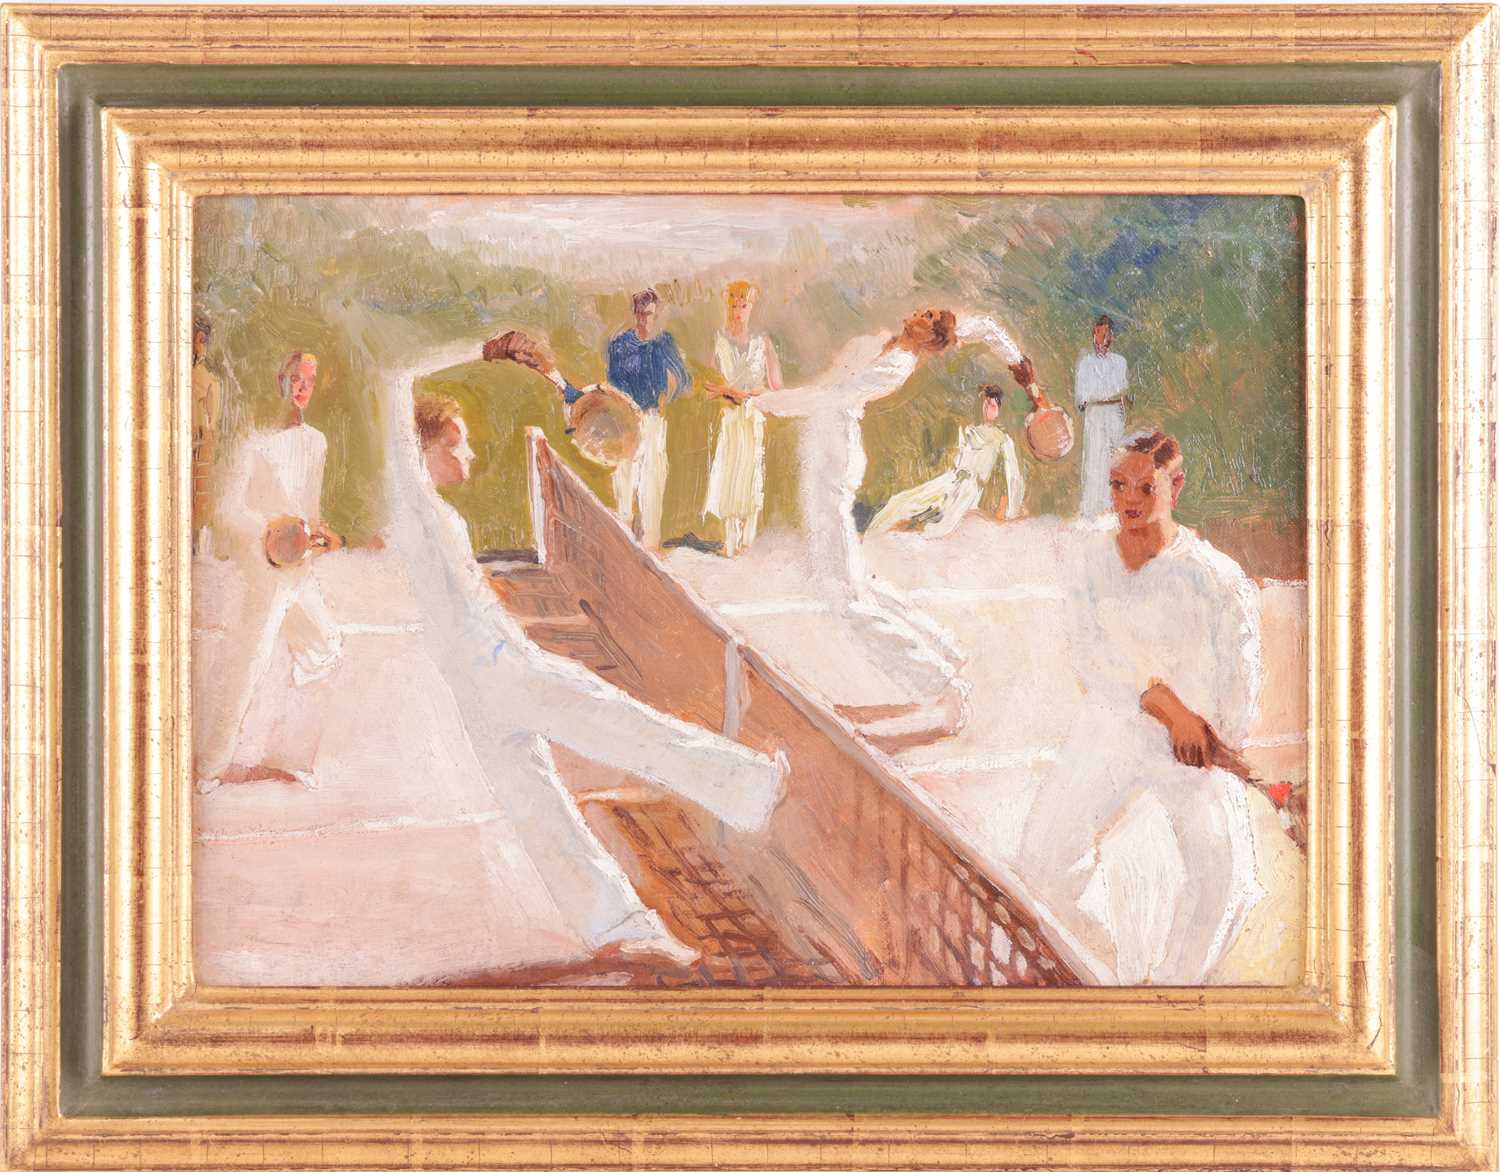 European School (Early 20th Century), The Doubles Tennis Match, unsigned, oil on canvas, 27 x 38 cm, - Image 2 of 6